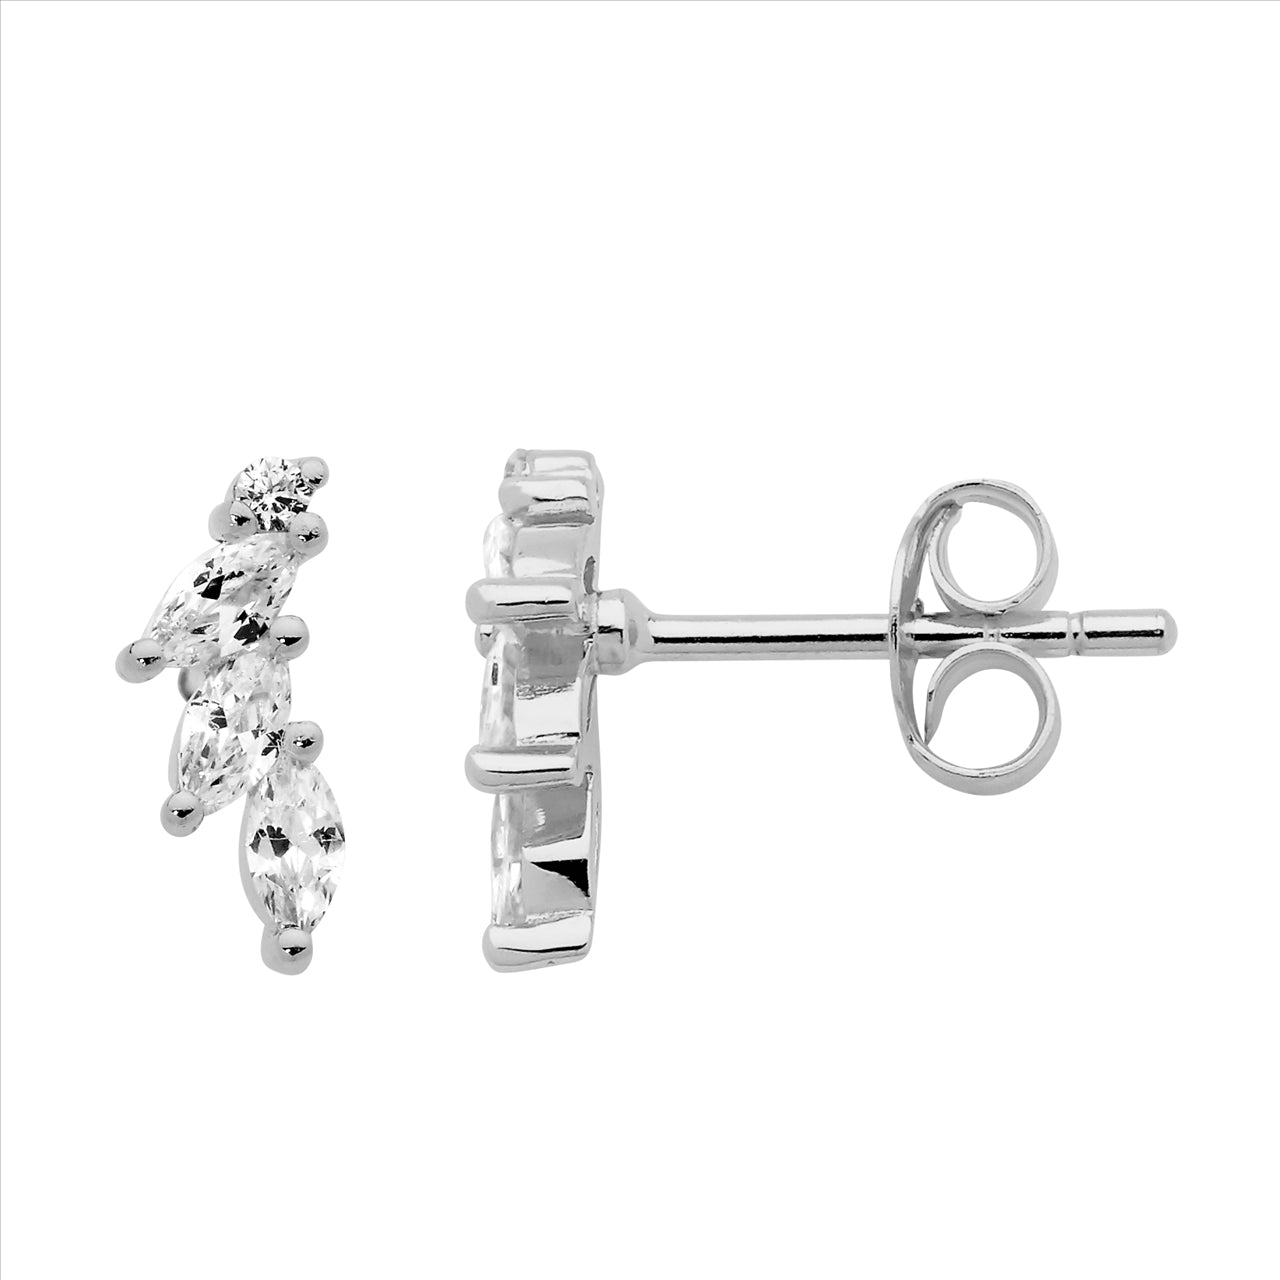 Ellani Sterling Silver Marquise & Round White Cubic Zirconium Stud Earrings